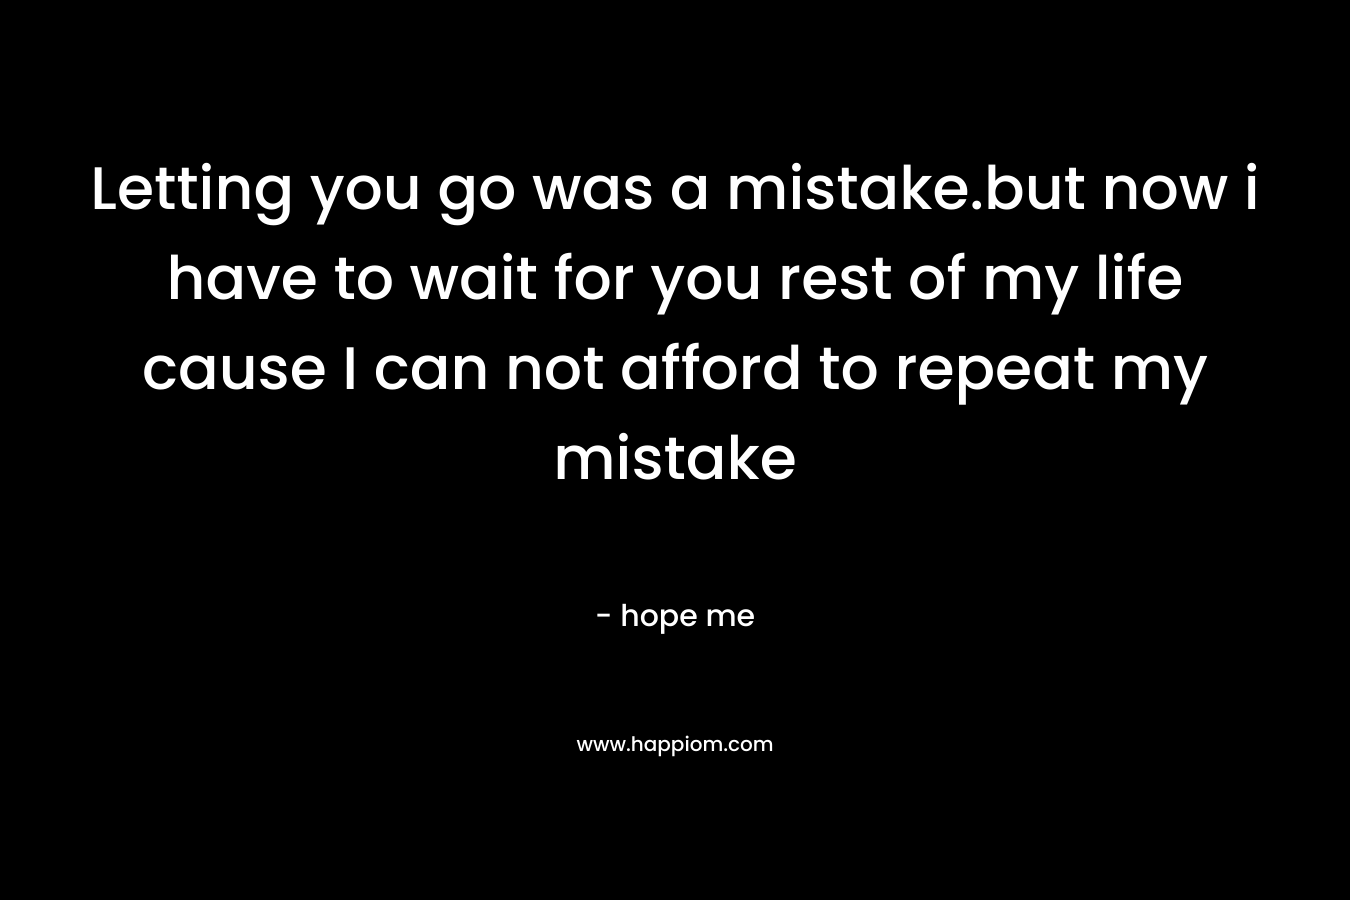 Letting you go was a mistake.but now i have to wait for you rest of my life cause I can not afford to repeat my mistake